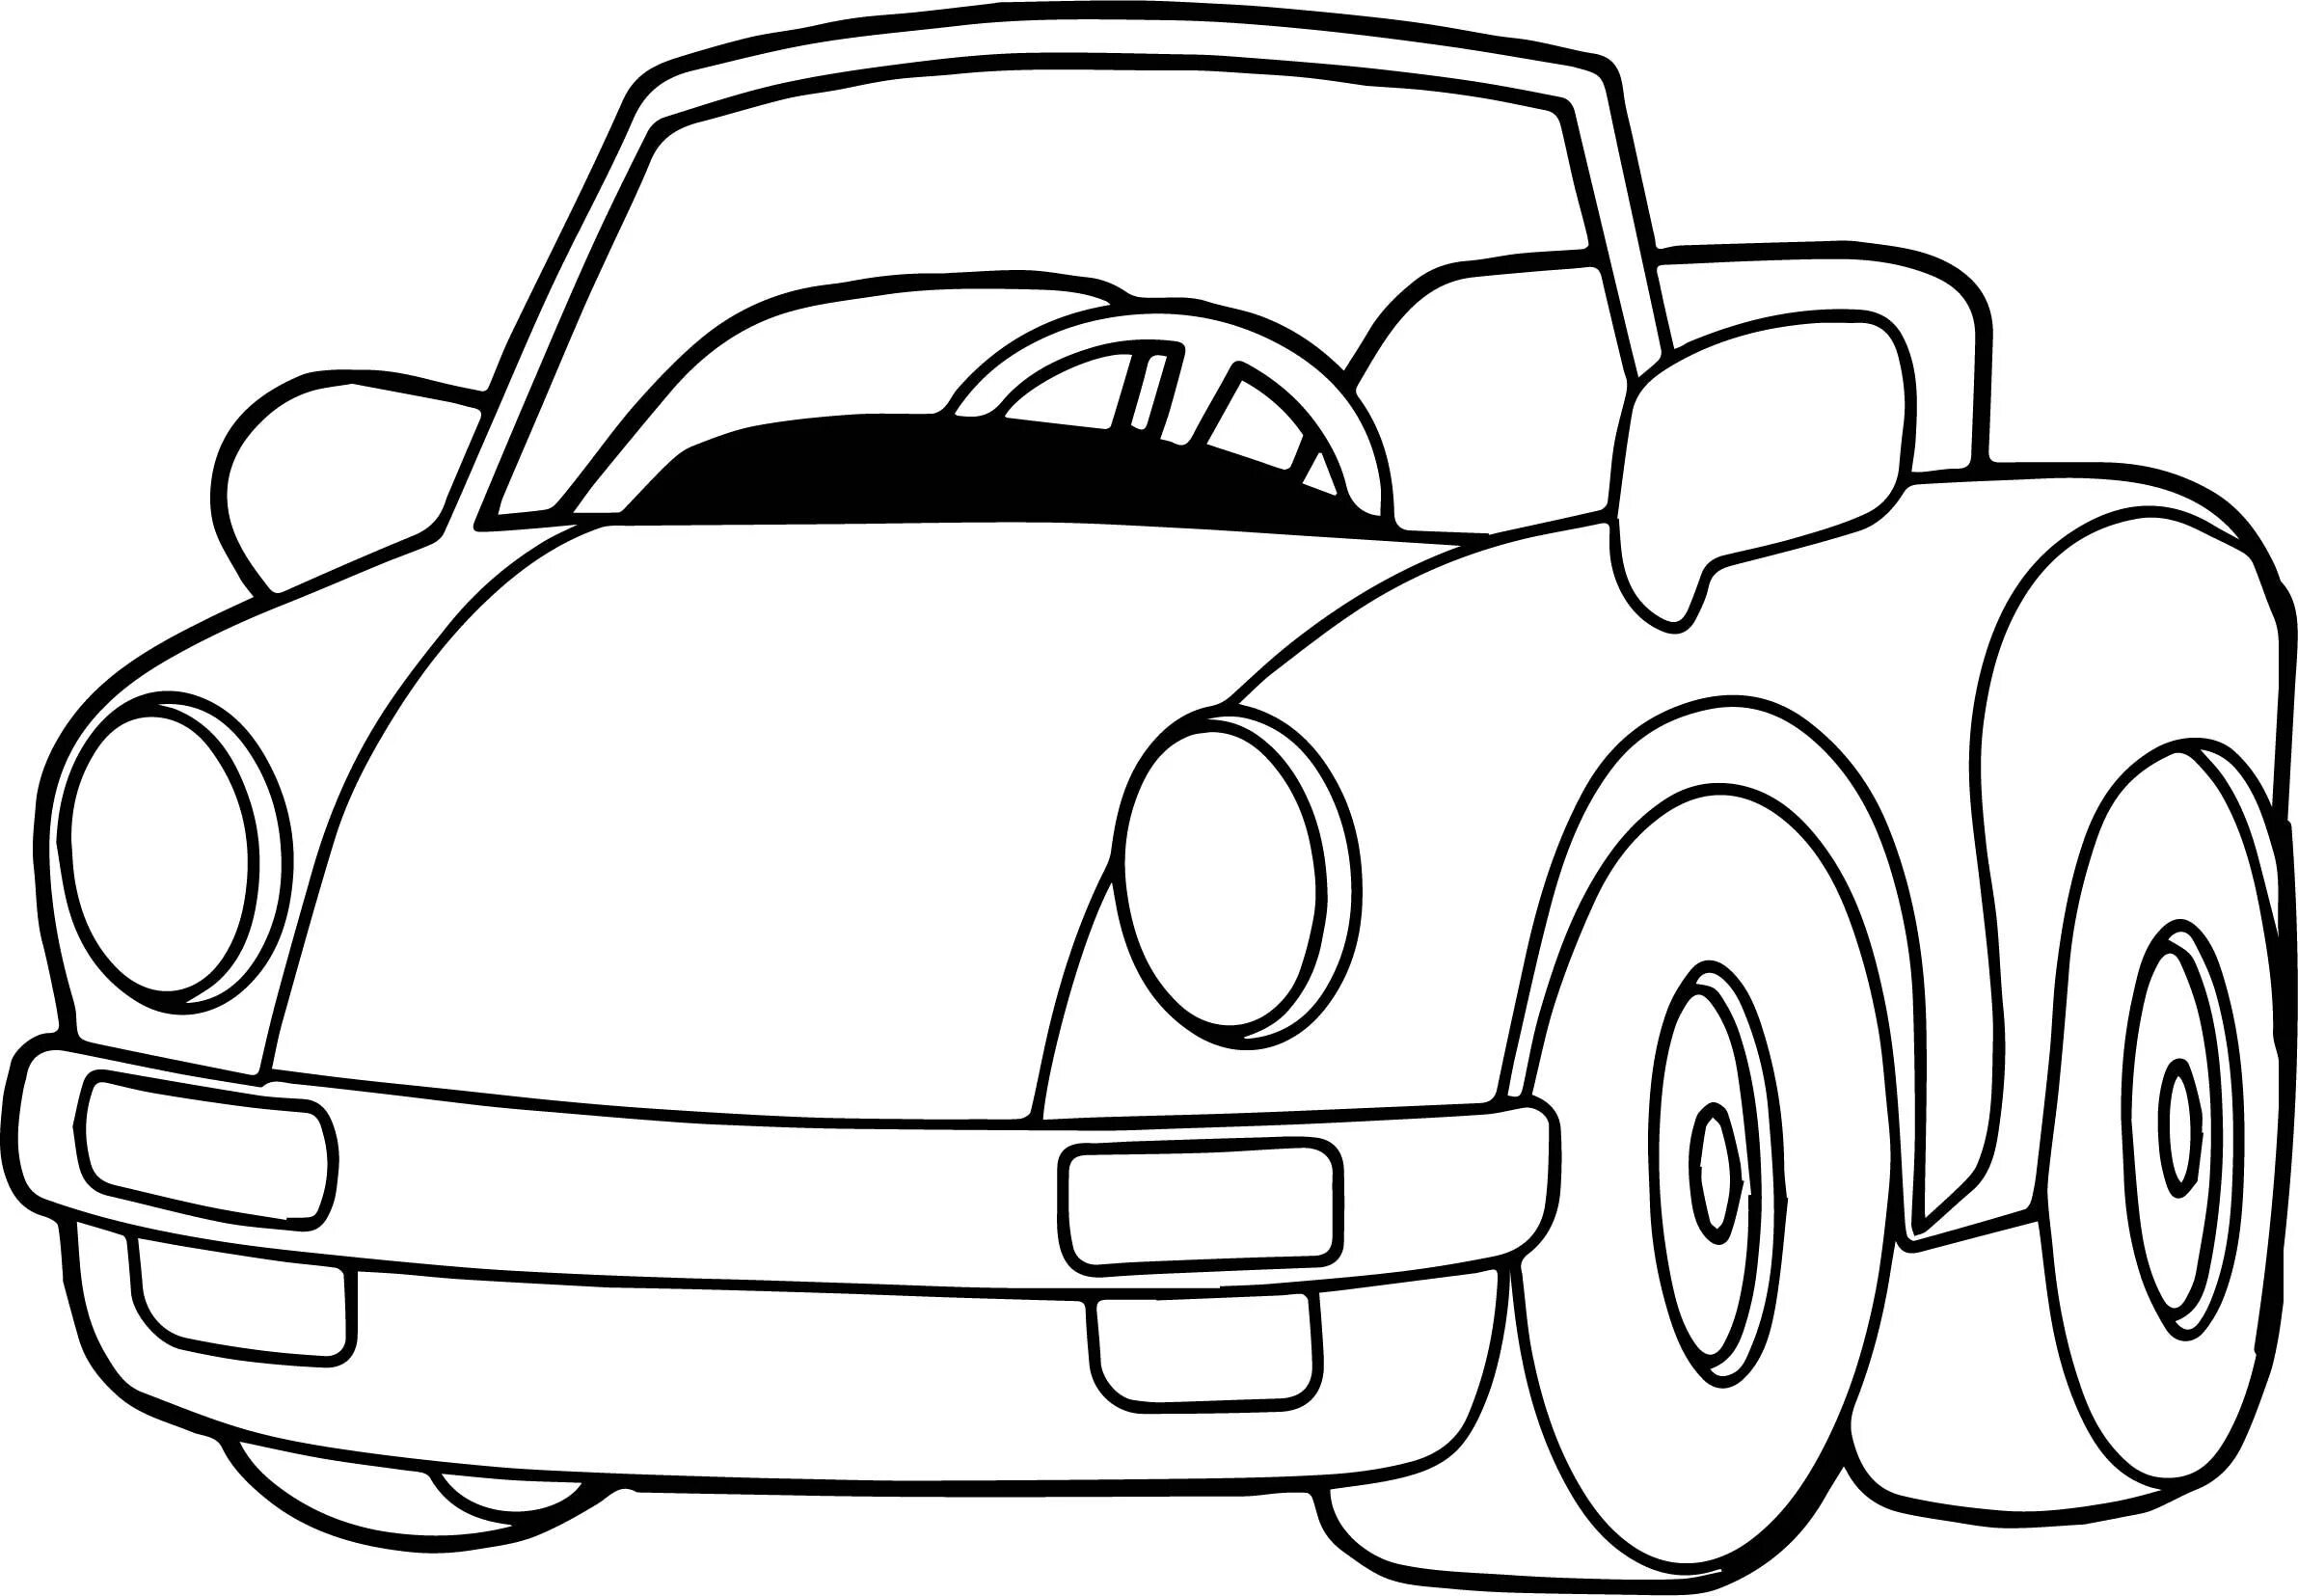 Animated car coloring page